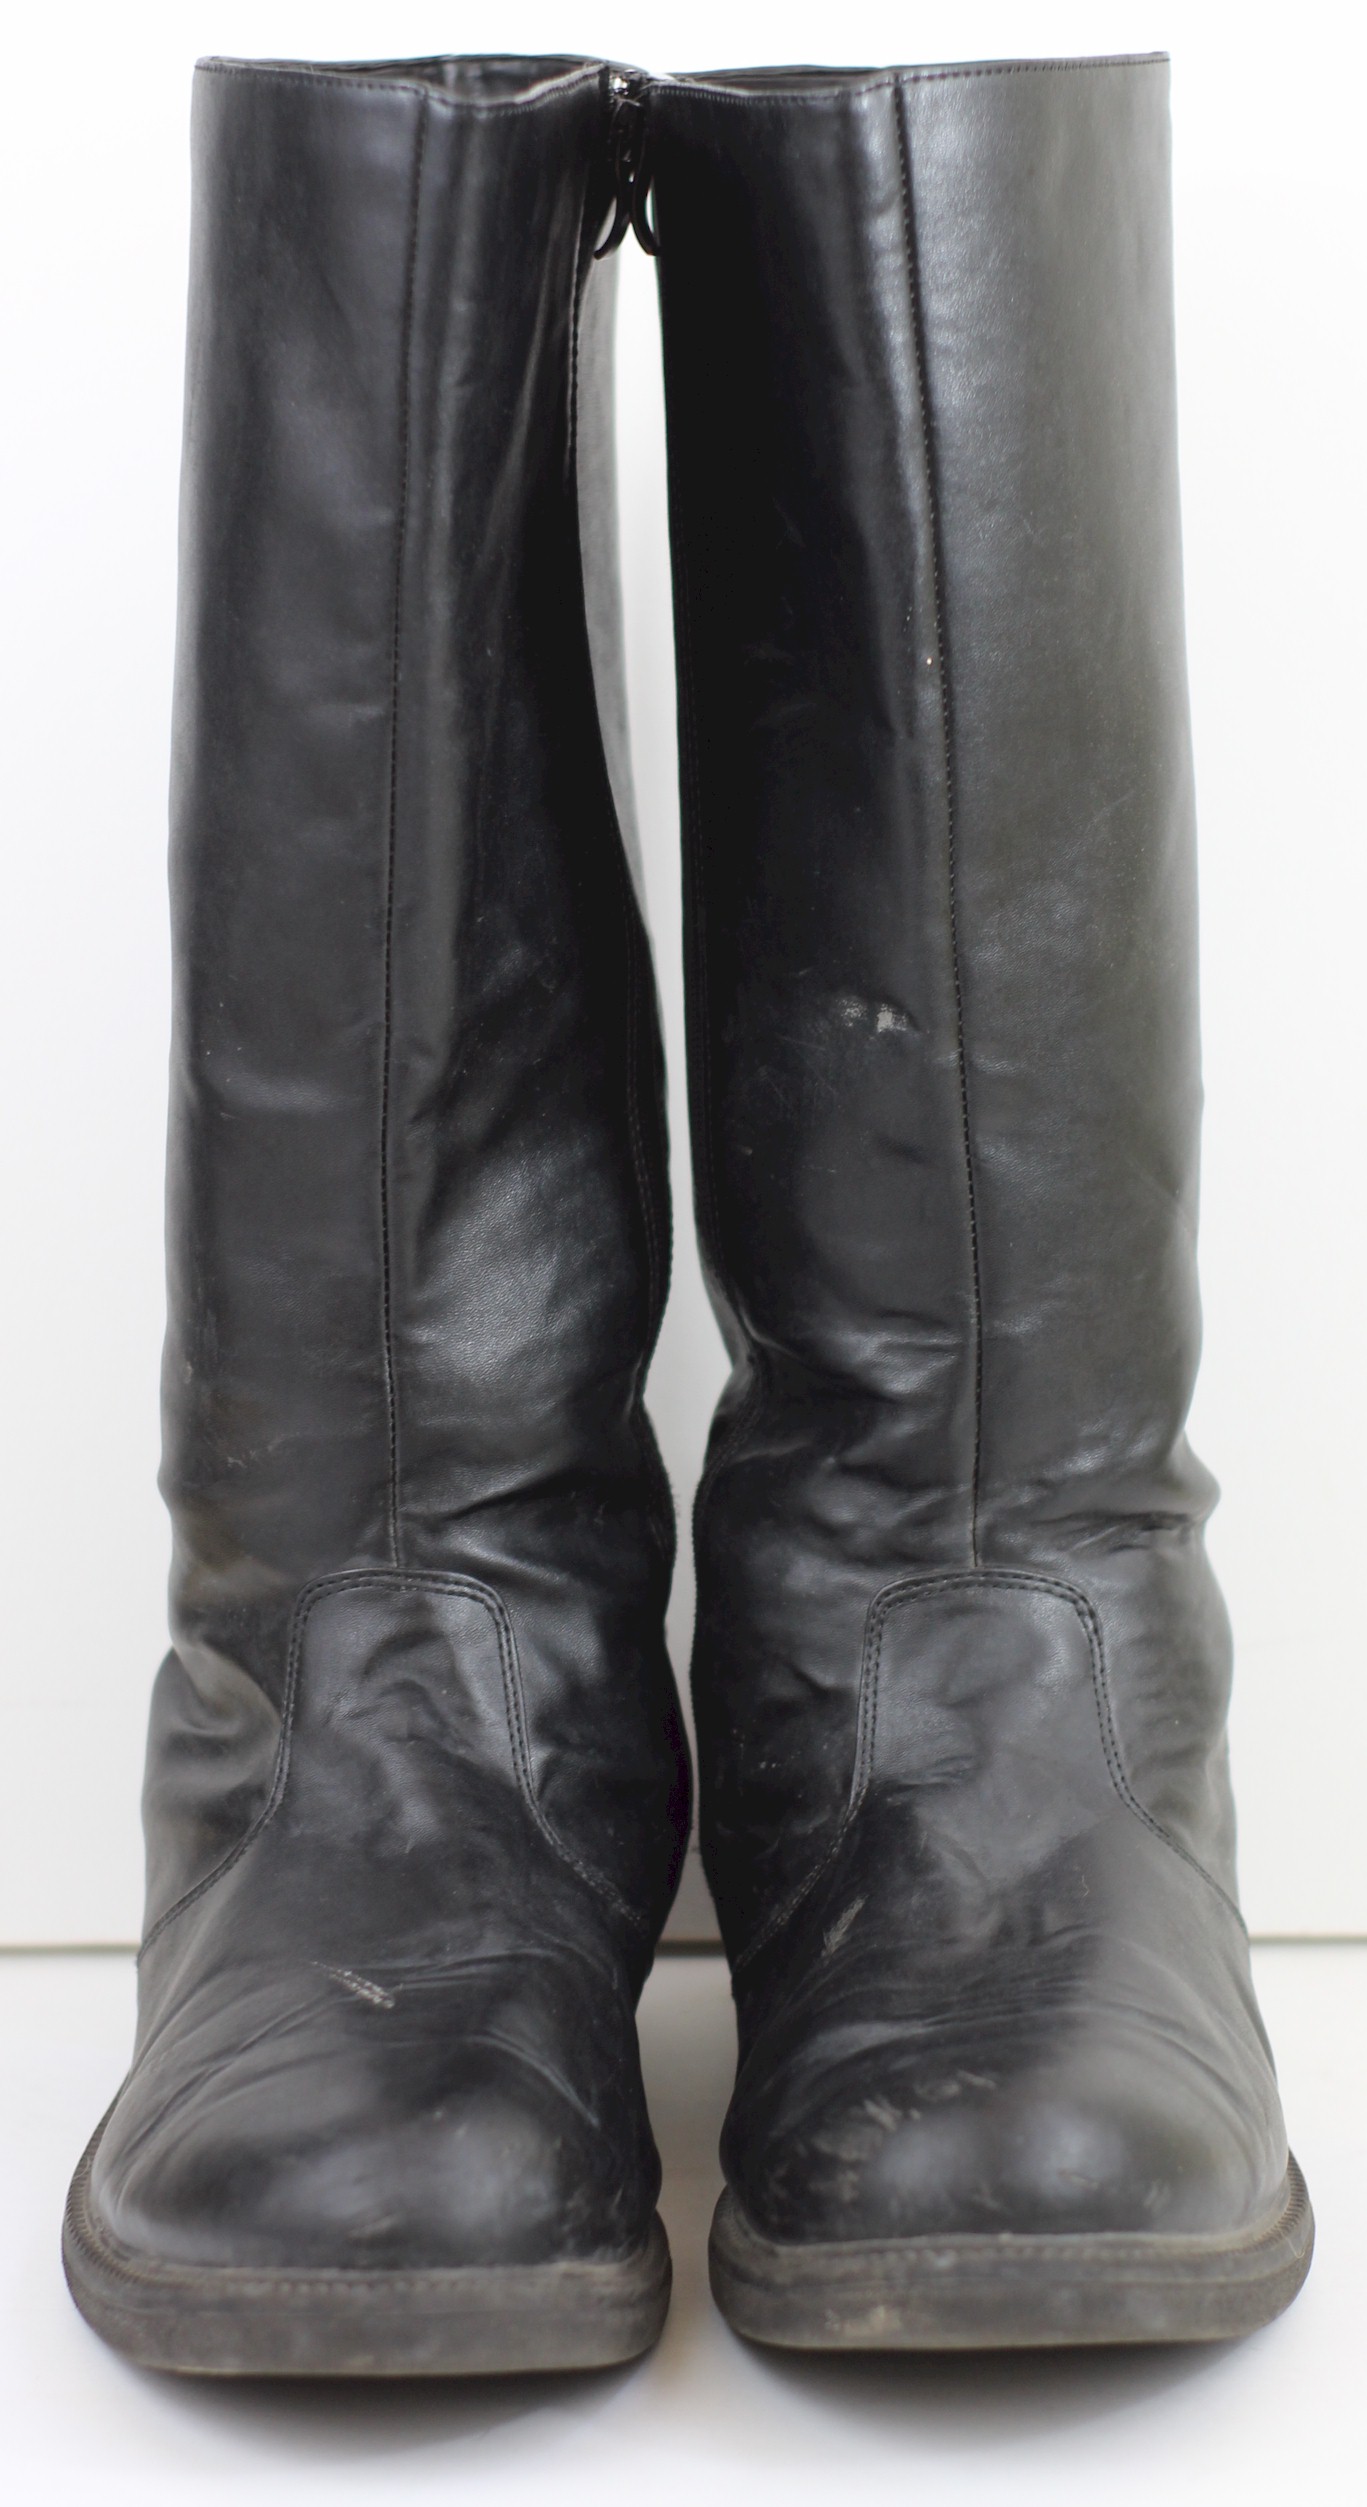 GERMAN OFFICER LEATHER JACK BOOTS WITH SIDE ZIPPER USED